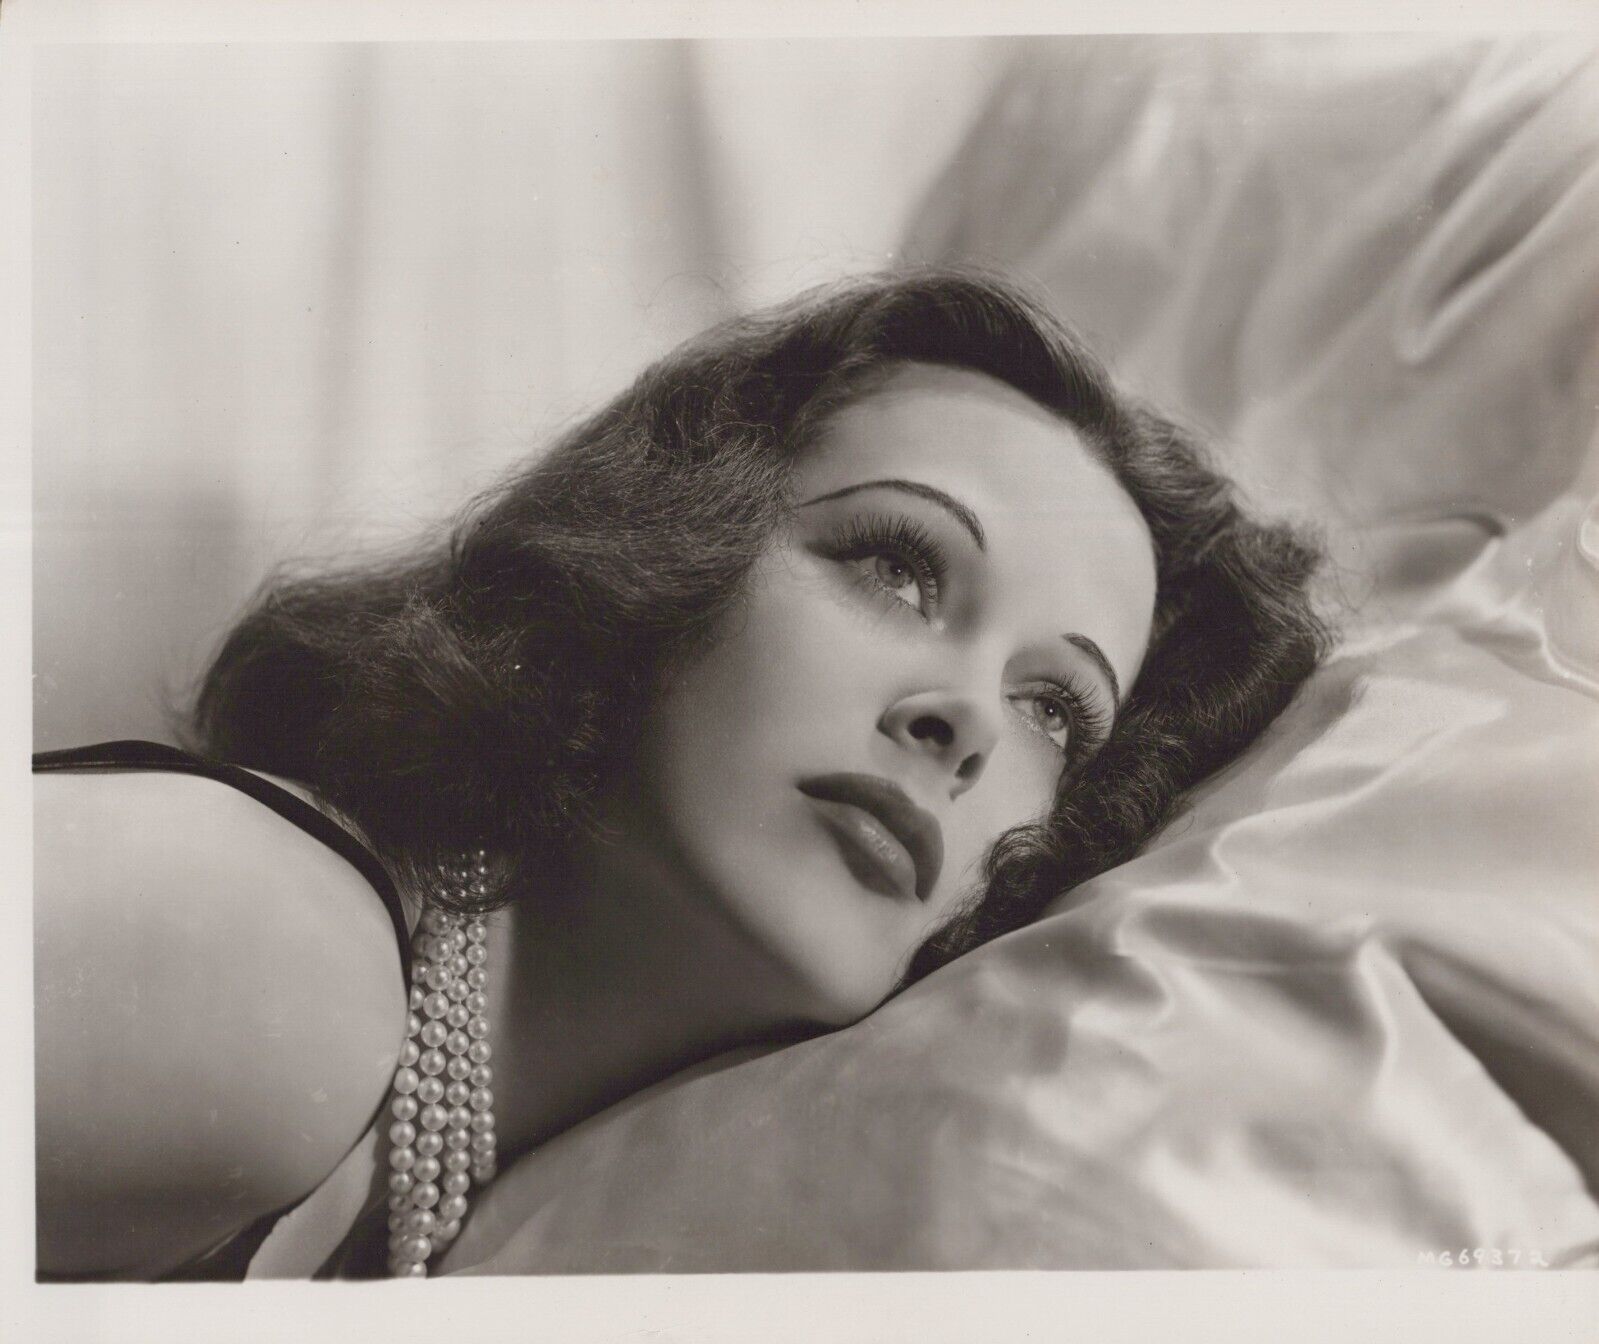 HOLLYWOOD BEAUTY HEDY LAMARR ALLURING POSE STUNNING PORTRAIT 1950s Photo C30